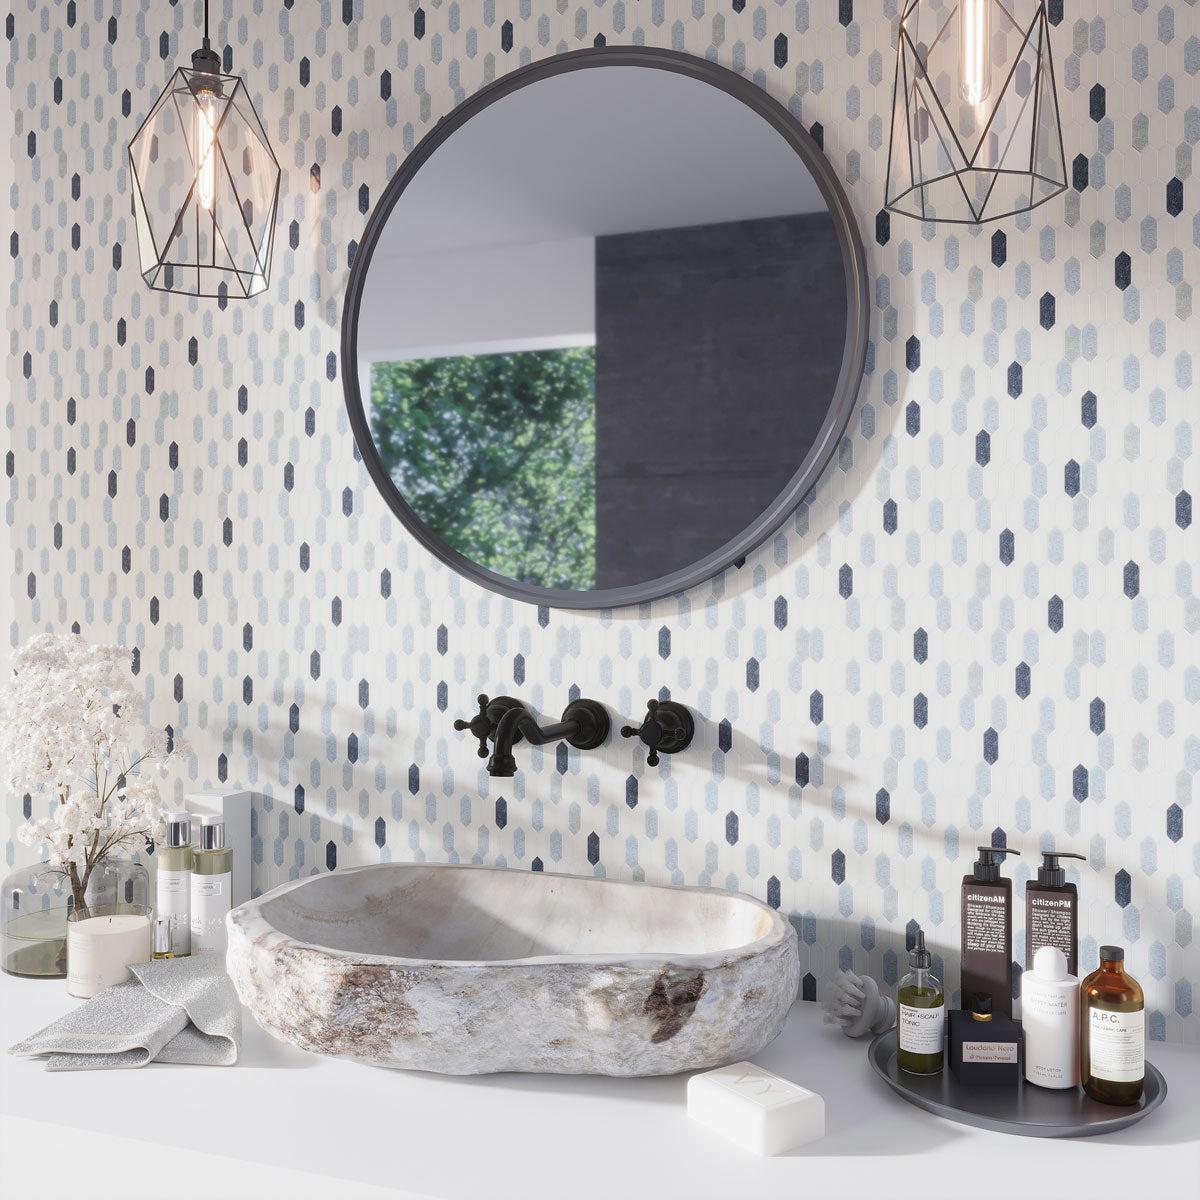 Modern boho bathroom with patterned tile in white and blue marble